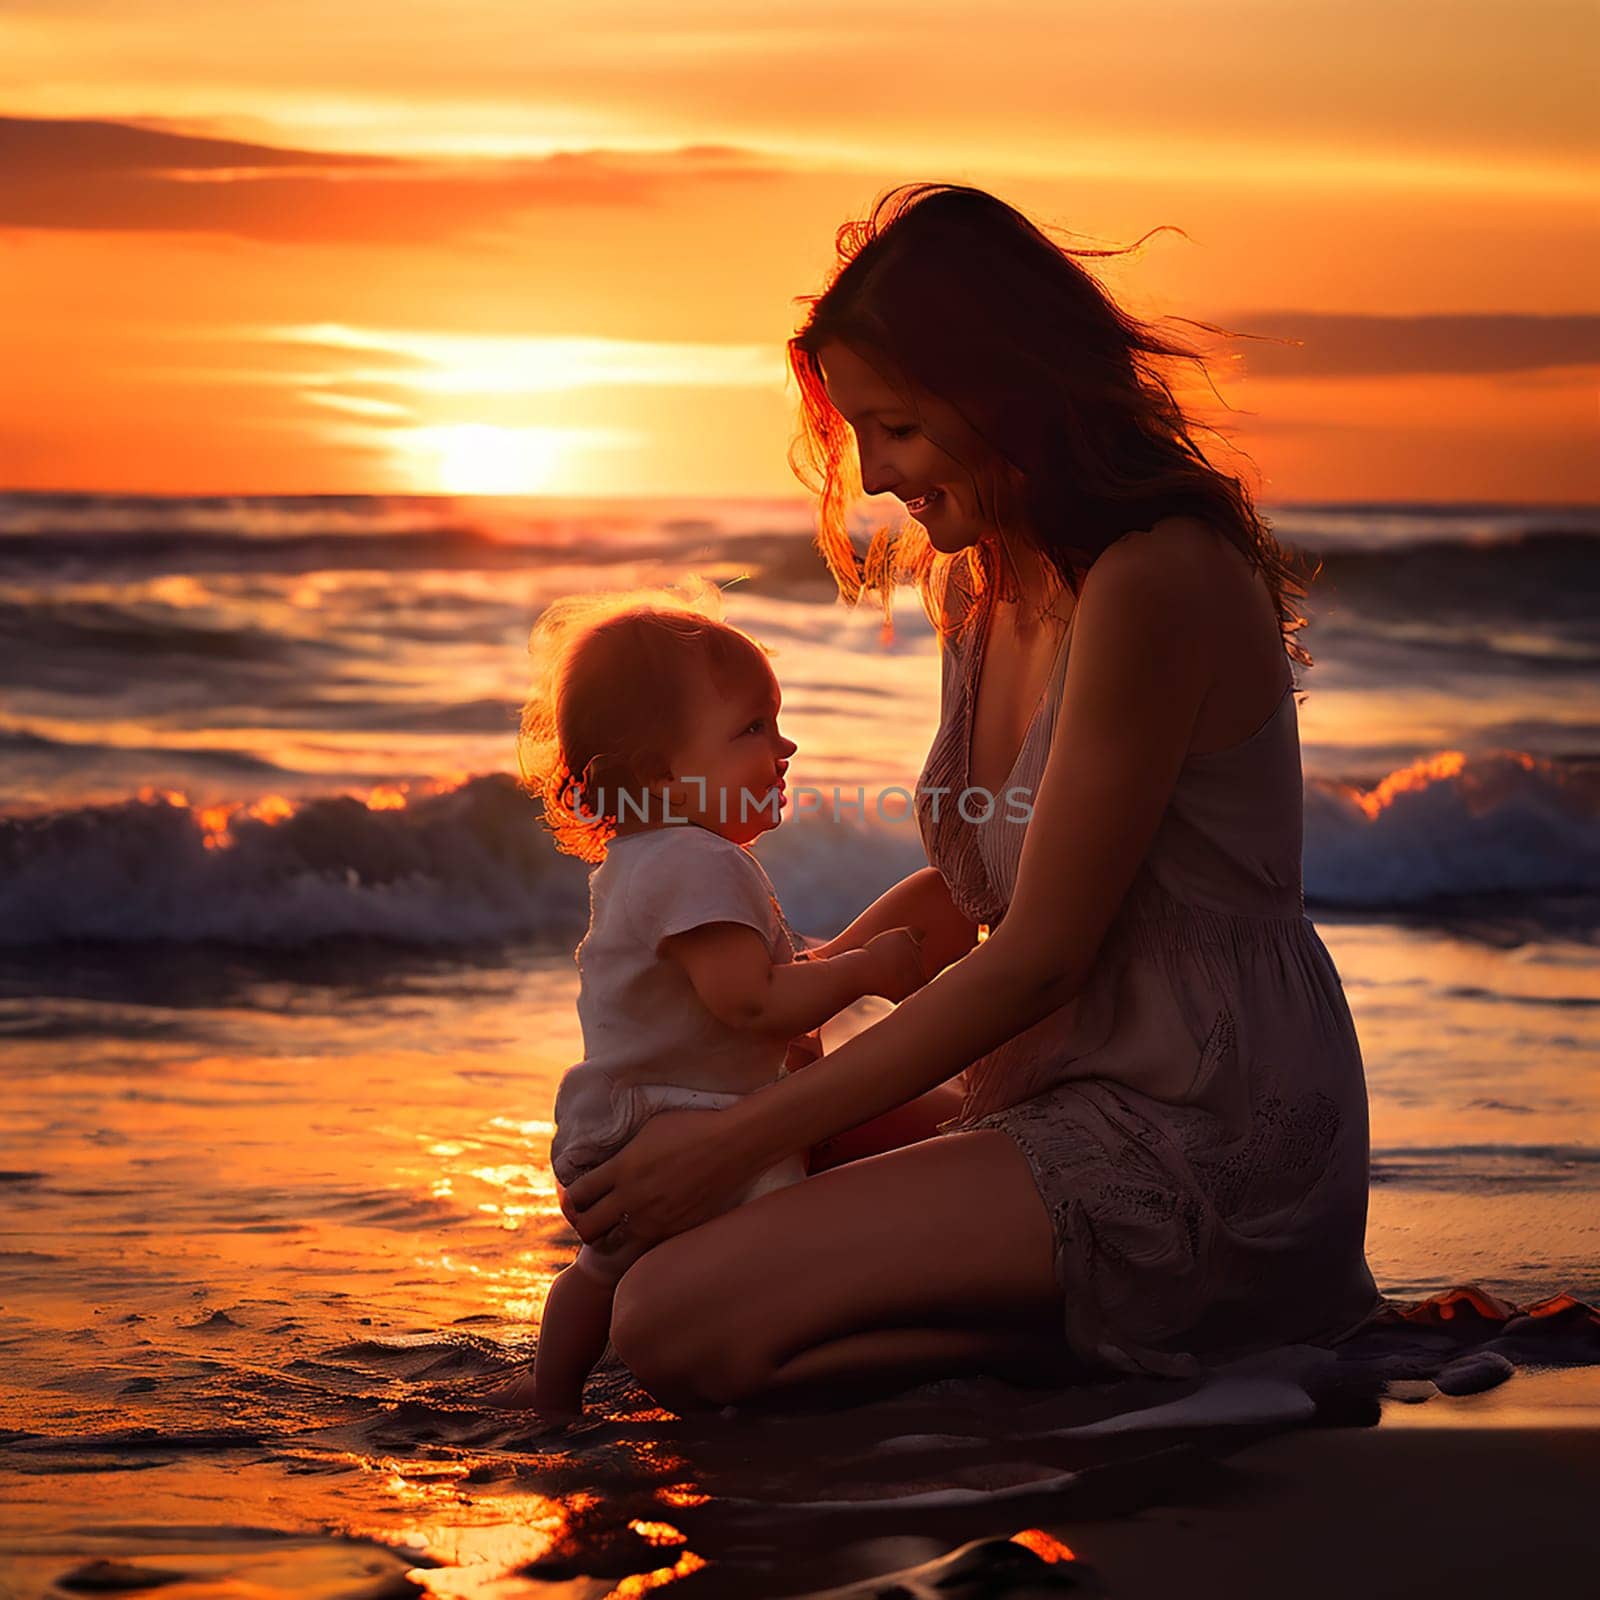 Woman at the Beach with Her Baby, Immersed in the Beauty of a Sunset